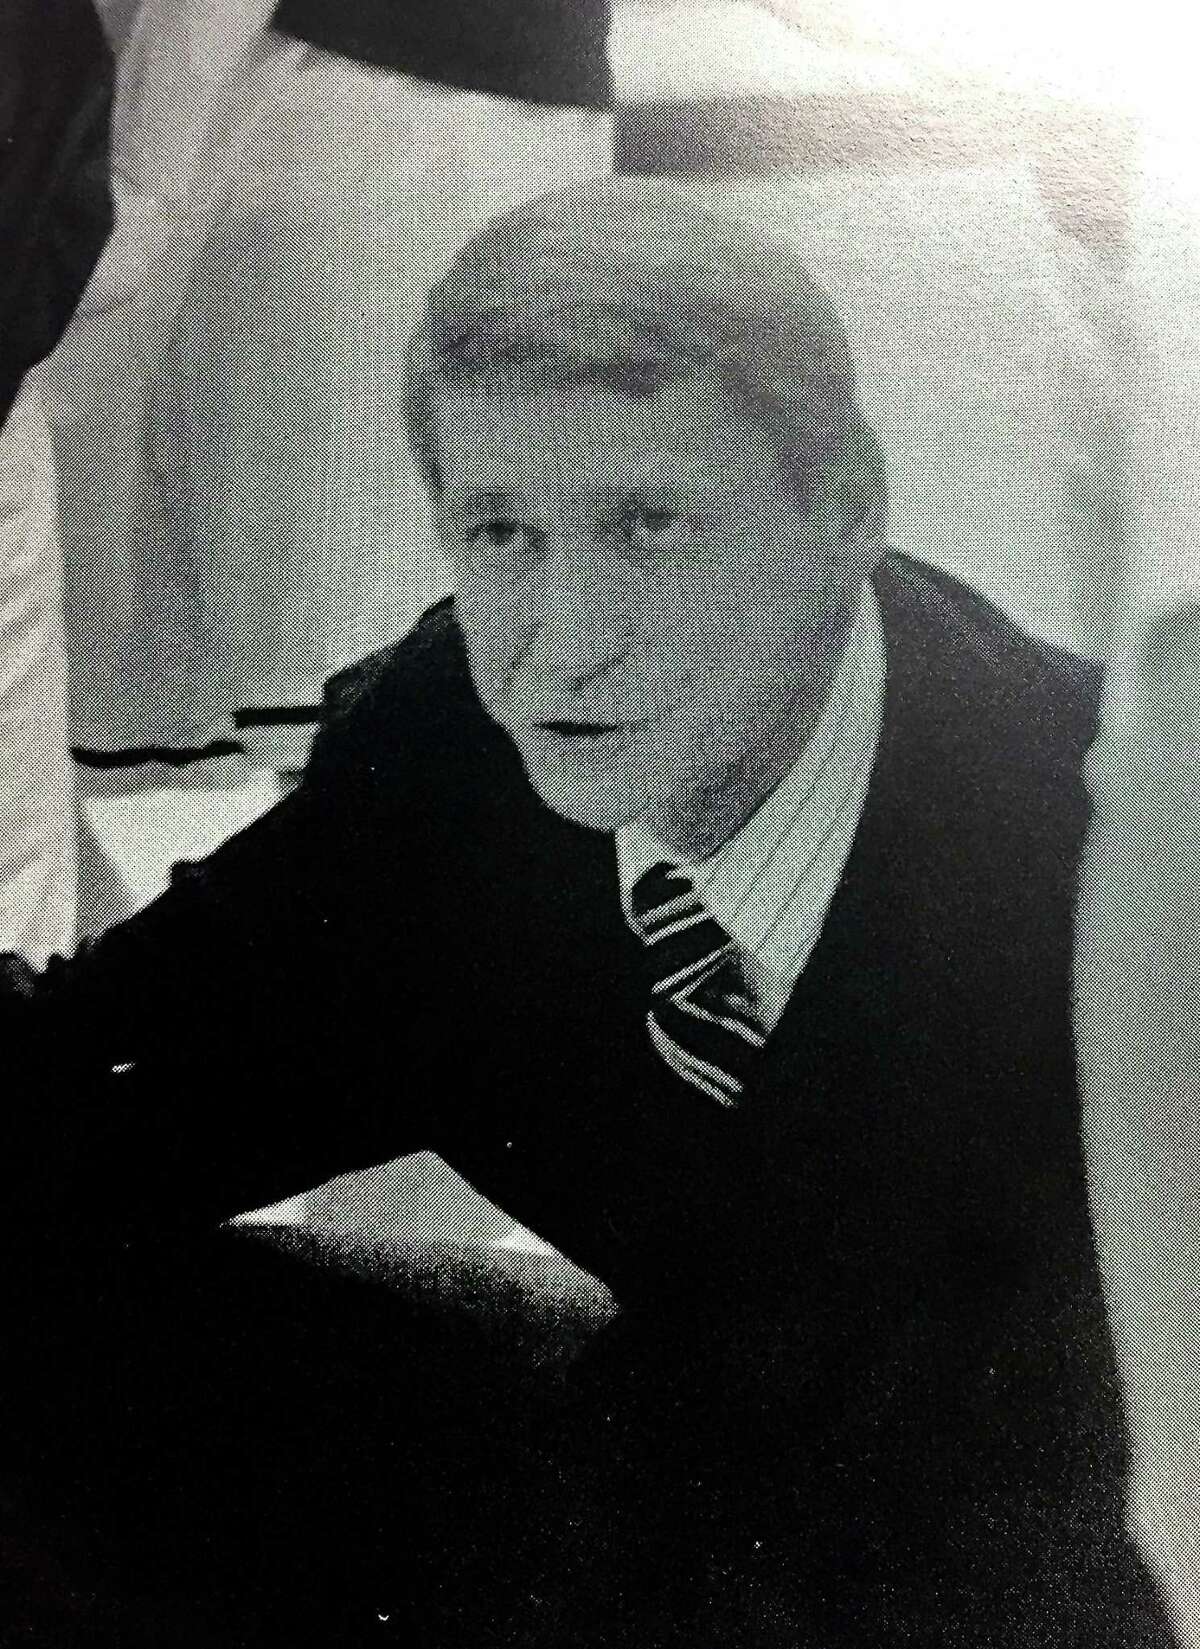 Texas Lutheran basketball coach Jim Shuler talks to his team during a timeout in a match in the late 1980s at the Memorial Gym in Seguin.